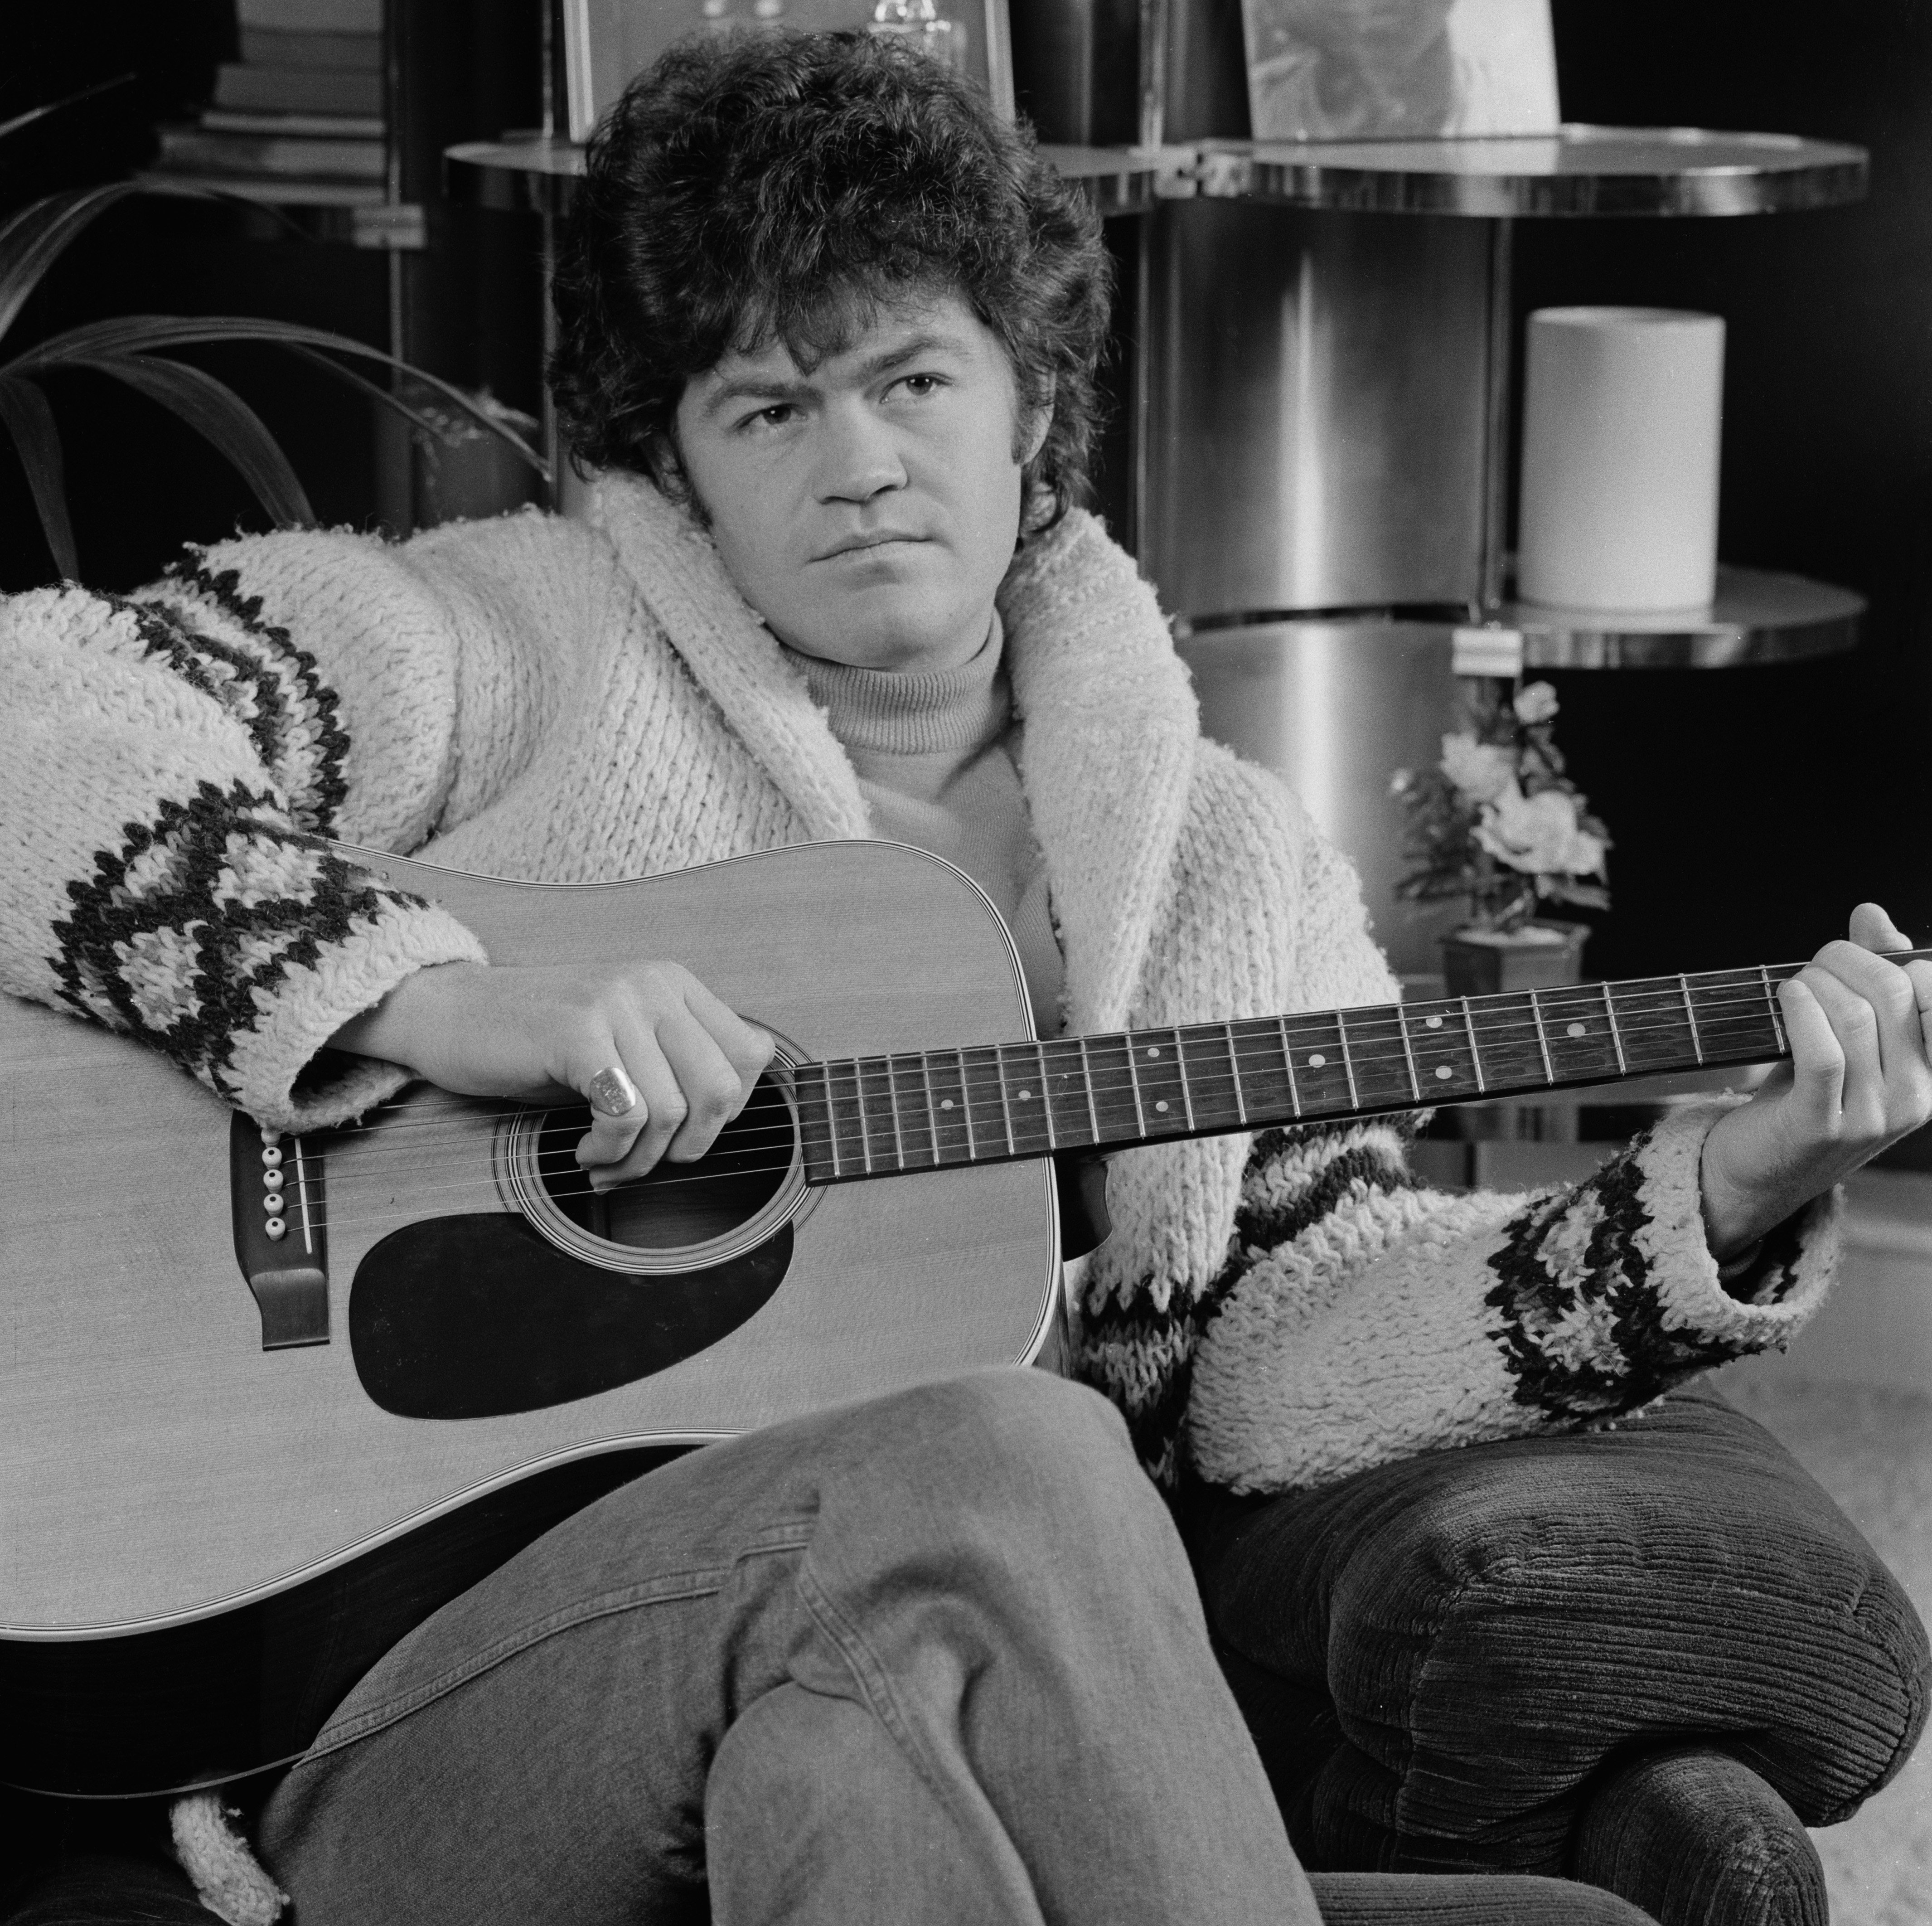 The Monkees' Micky Dolenz holding a guitar